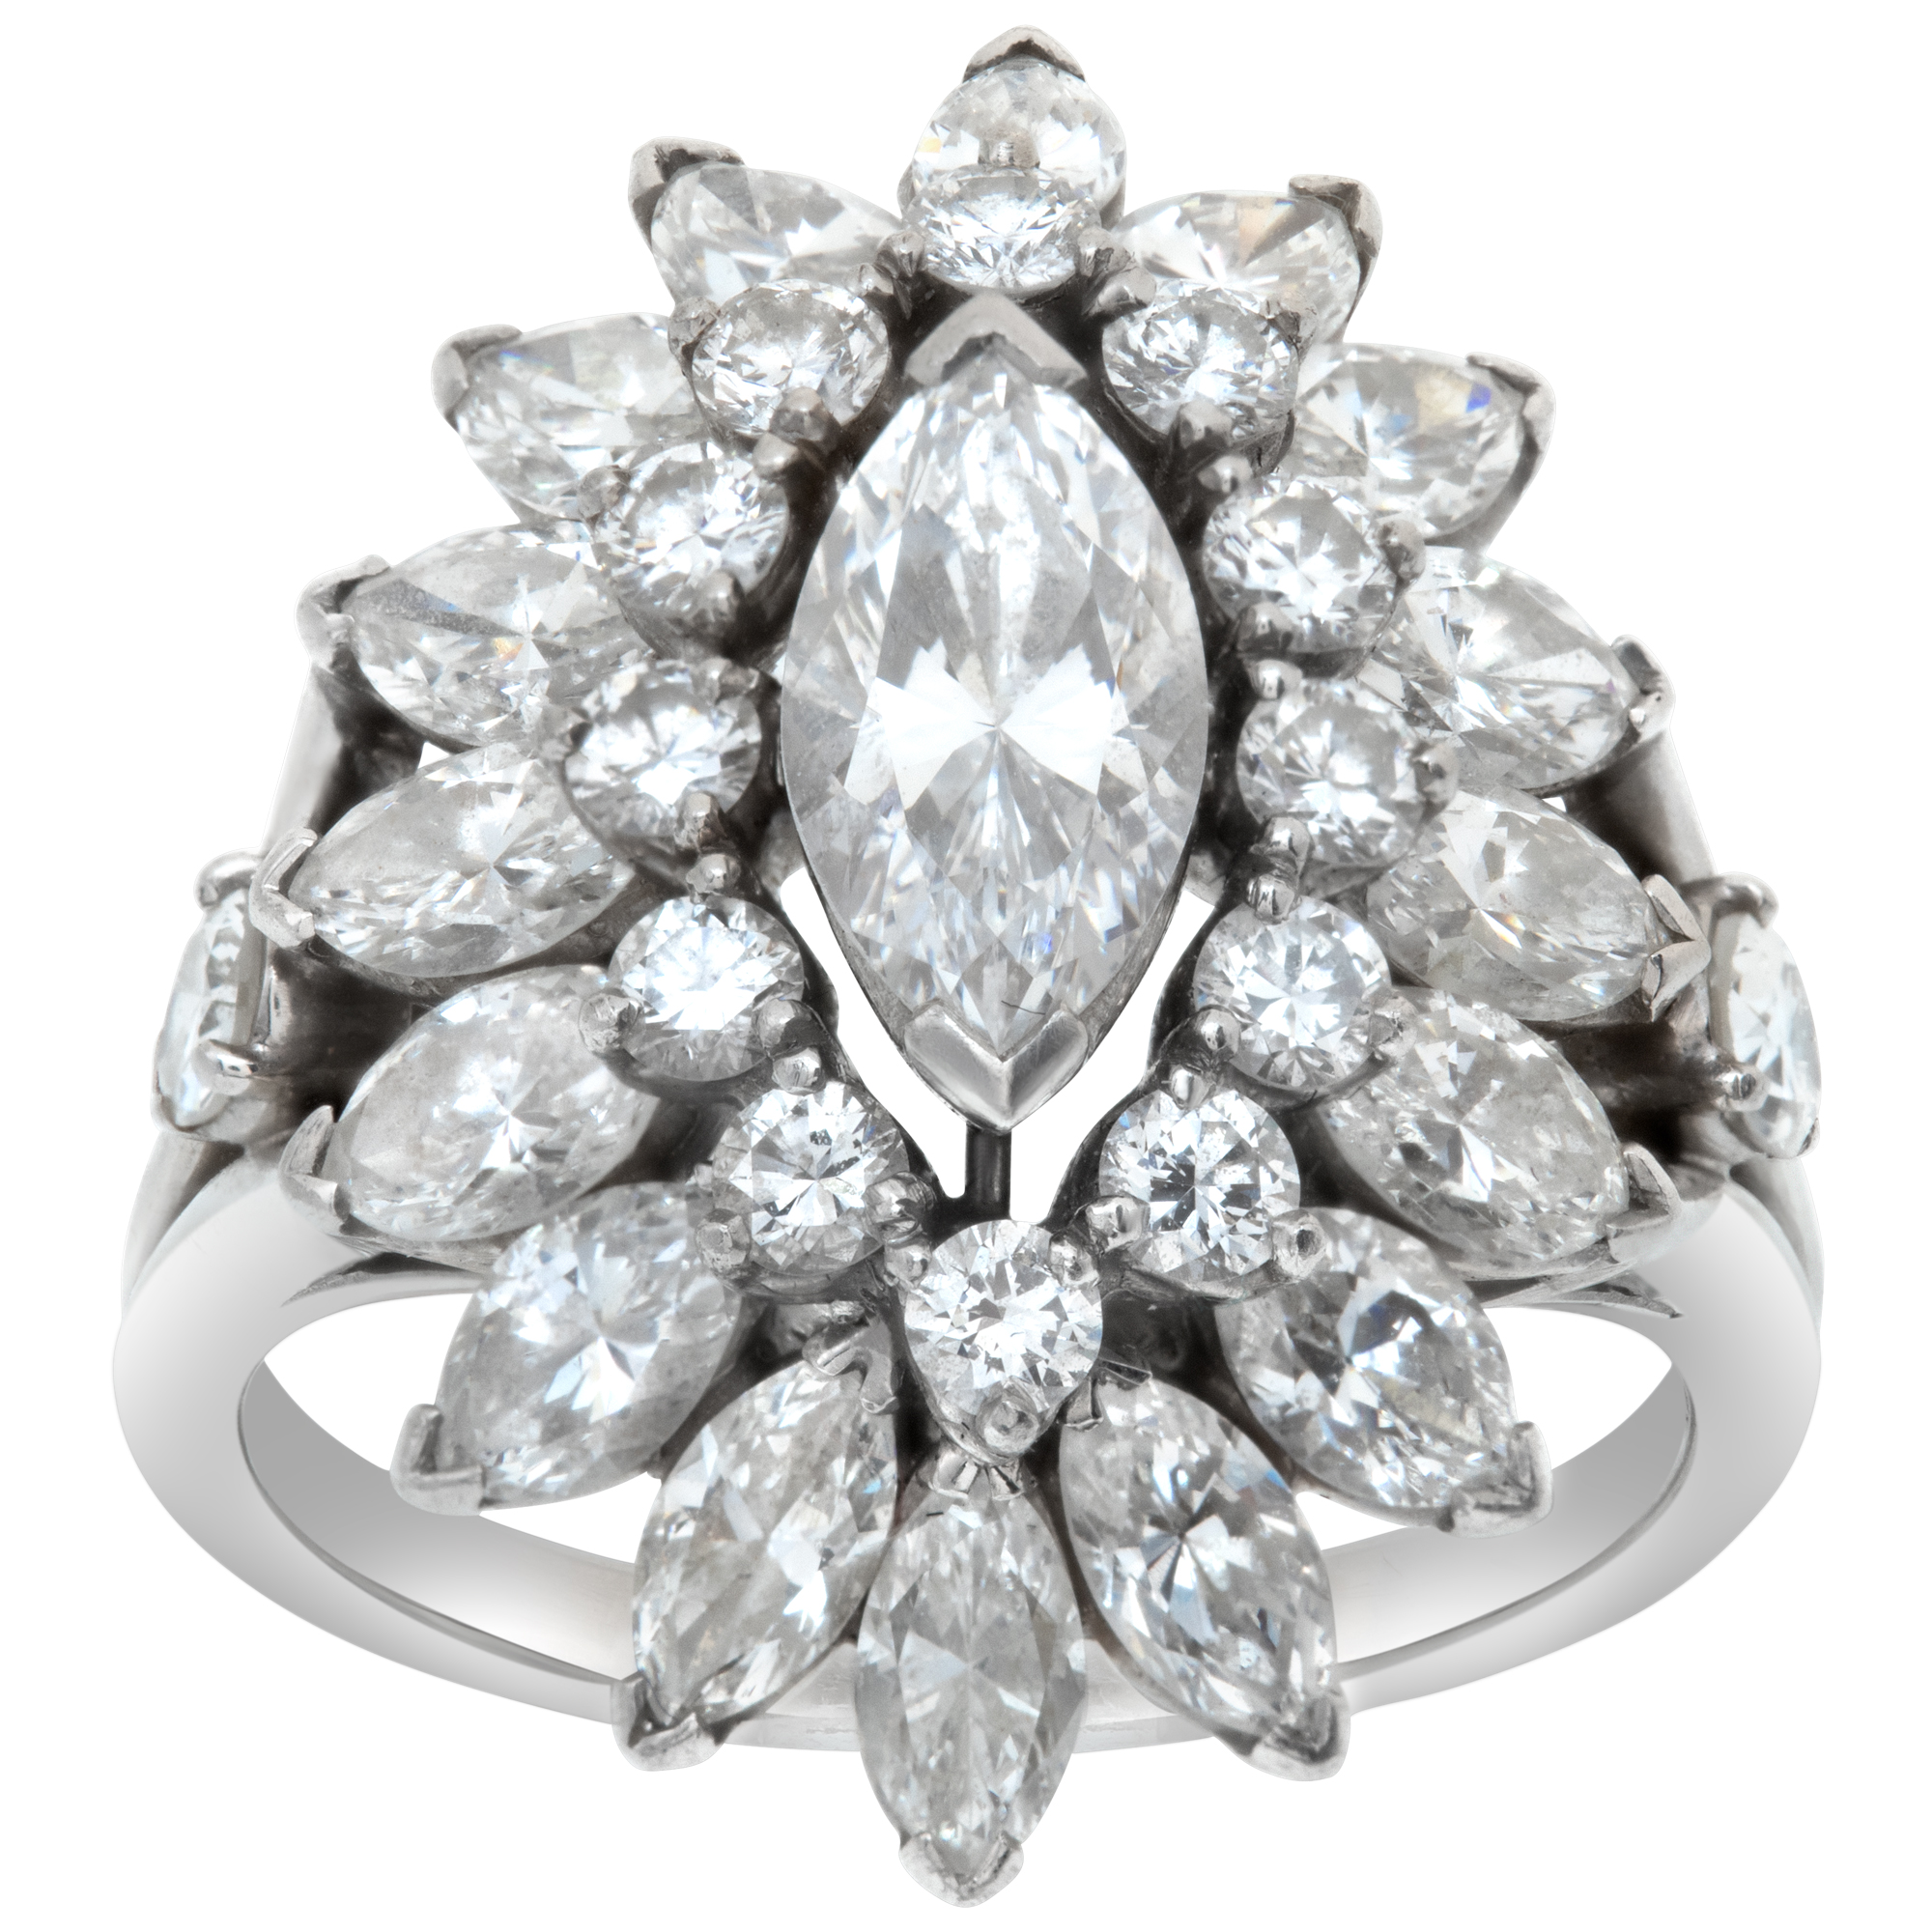 Marquise & round brilliant cut diamonds "Ballerina" ring set in platinum (over 3.75 carats approx. total weight